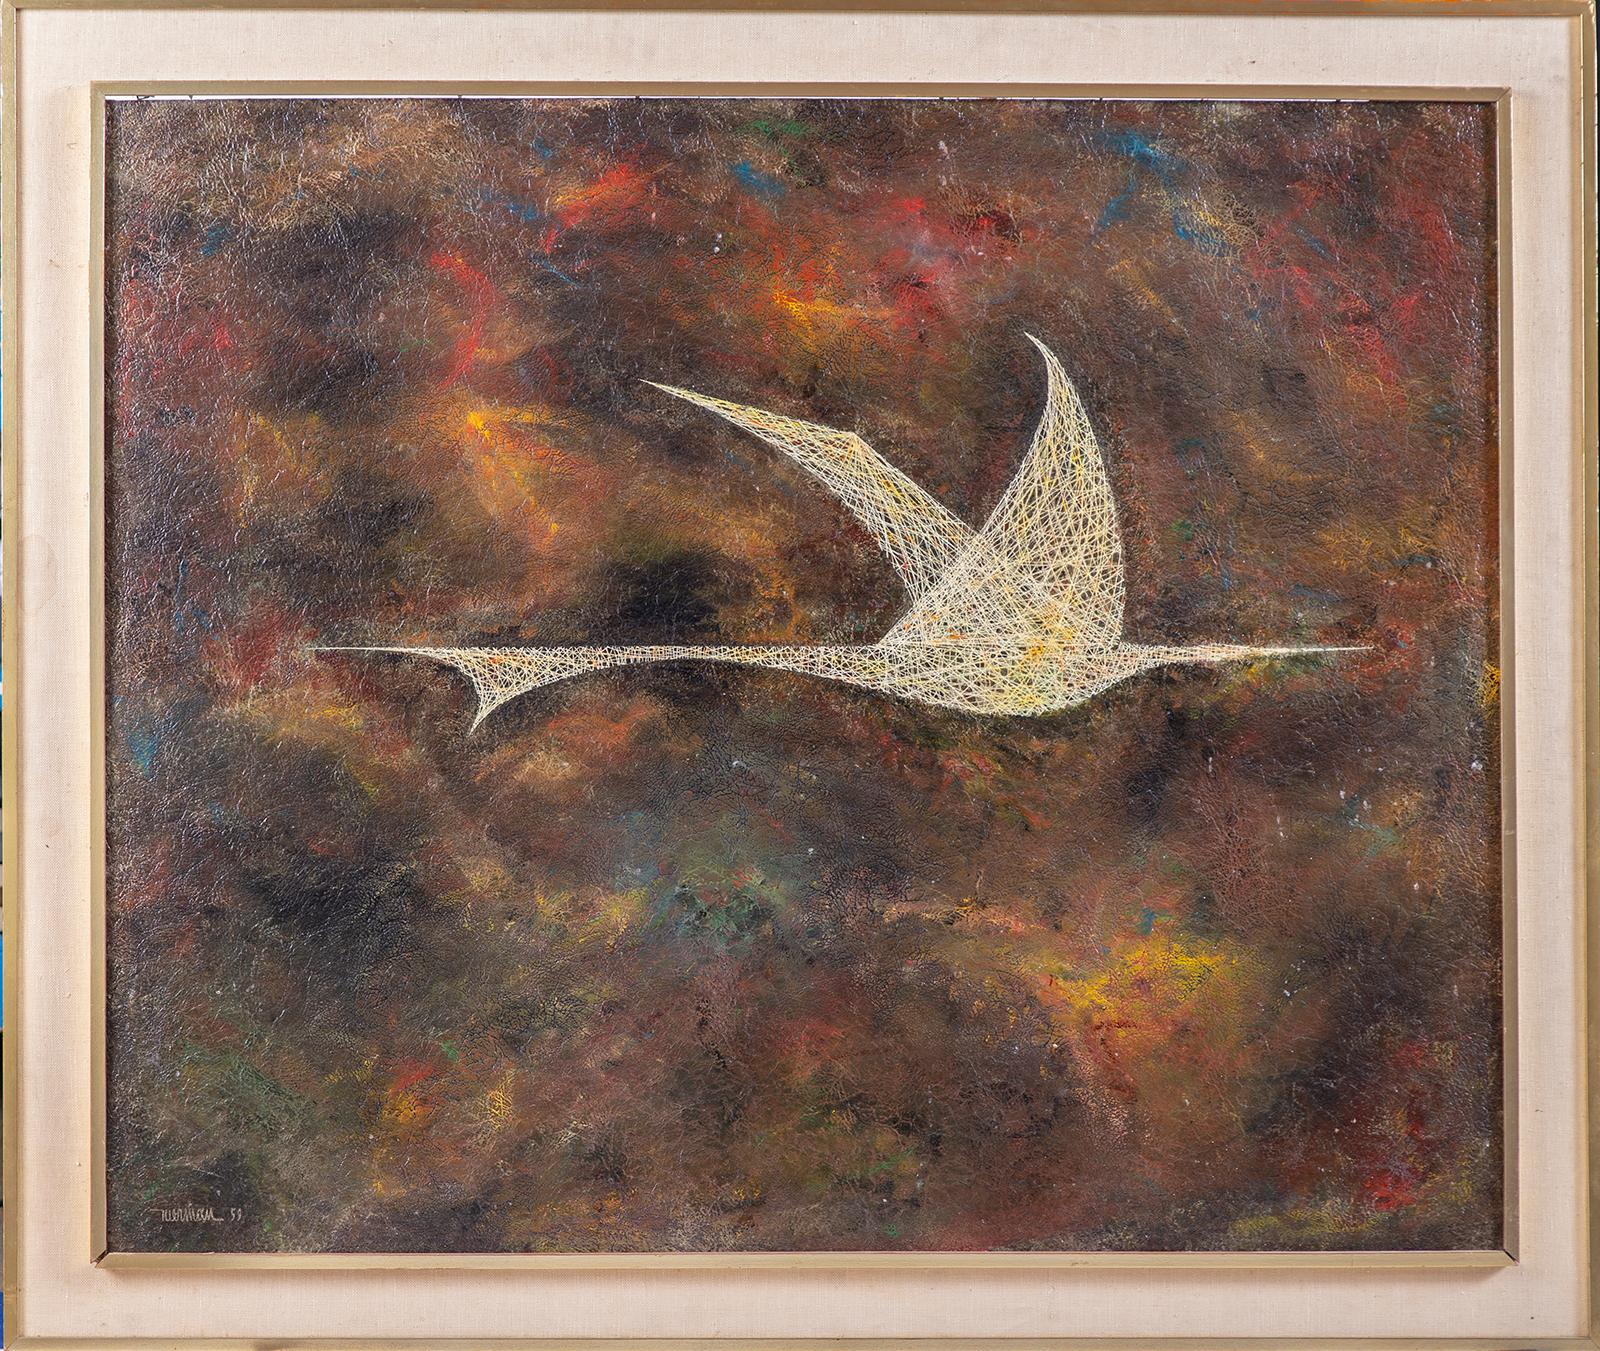 Artist: Leonardo Nierman
Title: Bird in Flight
Medium: Oil on Masonite Board
Size: 40" x 48"
Framed: 46" x 55"
Year: 1959
Signed by the artist in excellent condition
Certificate of Authenticity included directly from the Henry Hirsch Collection. You